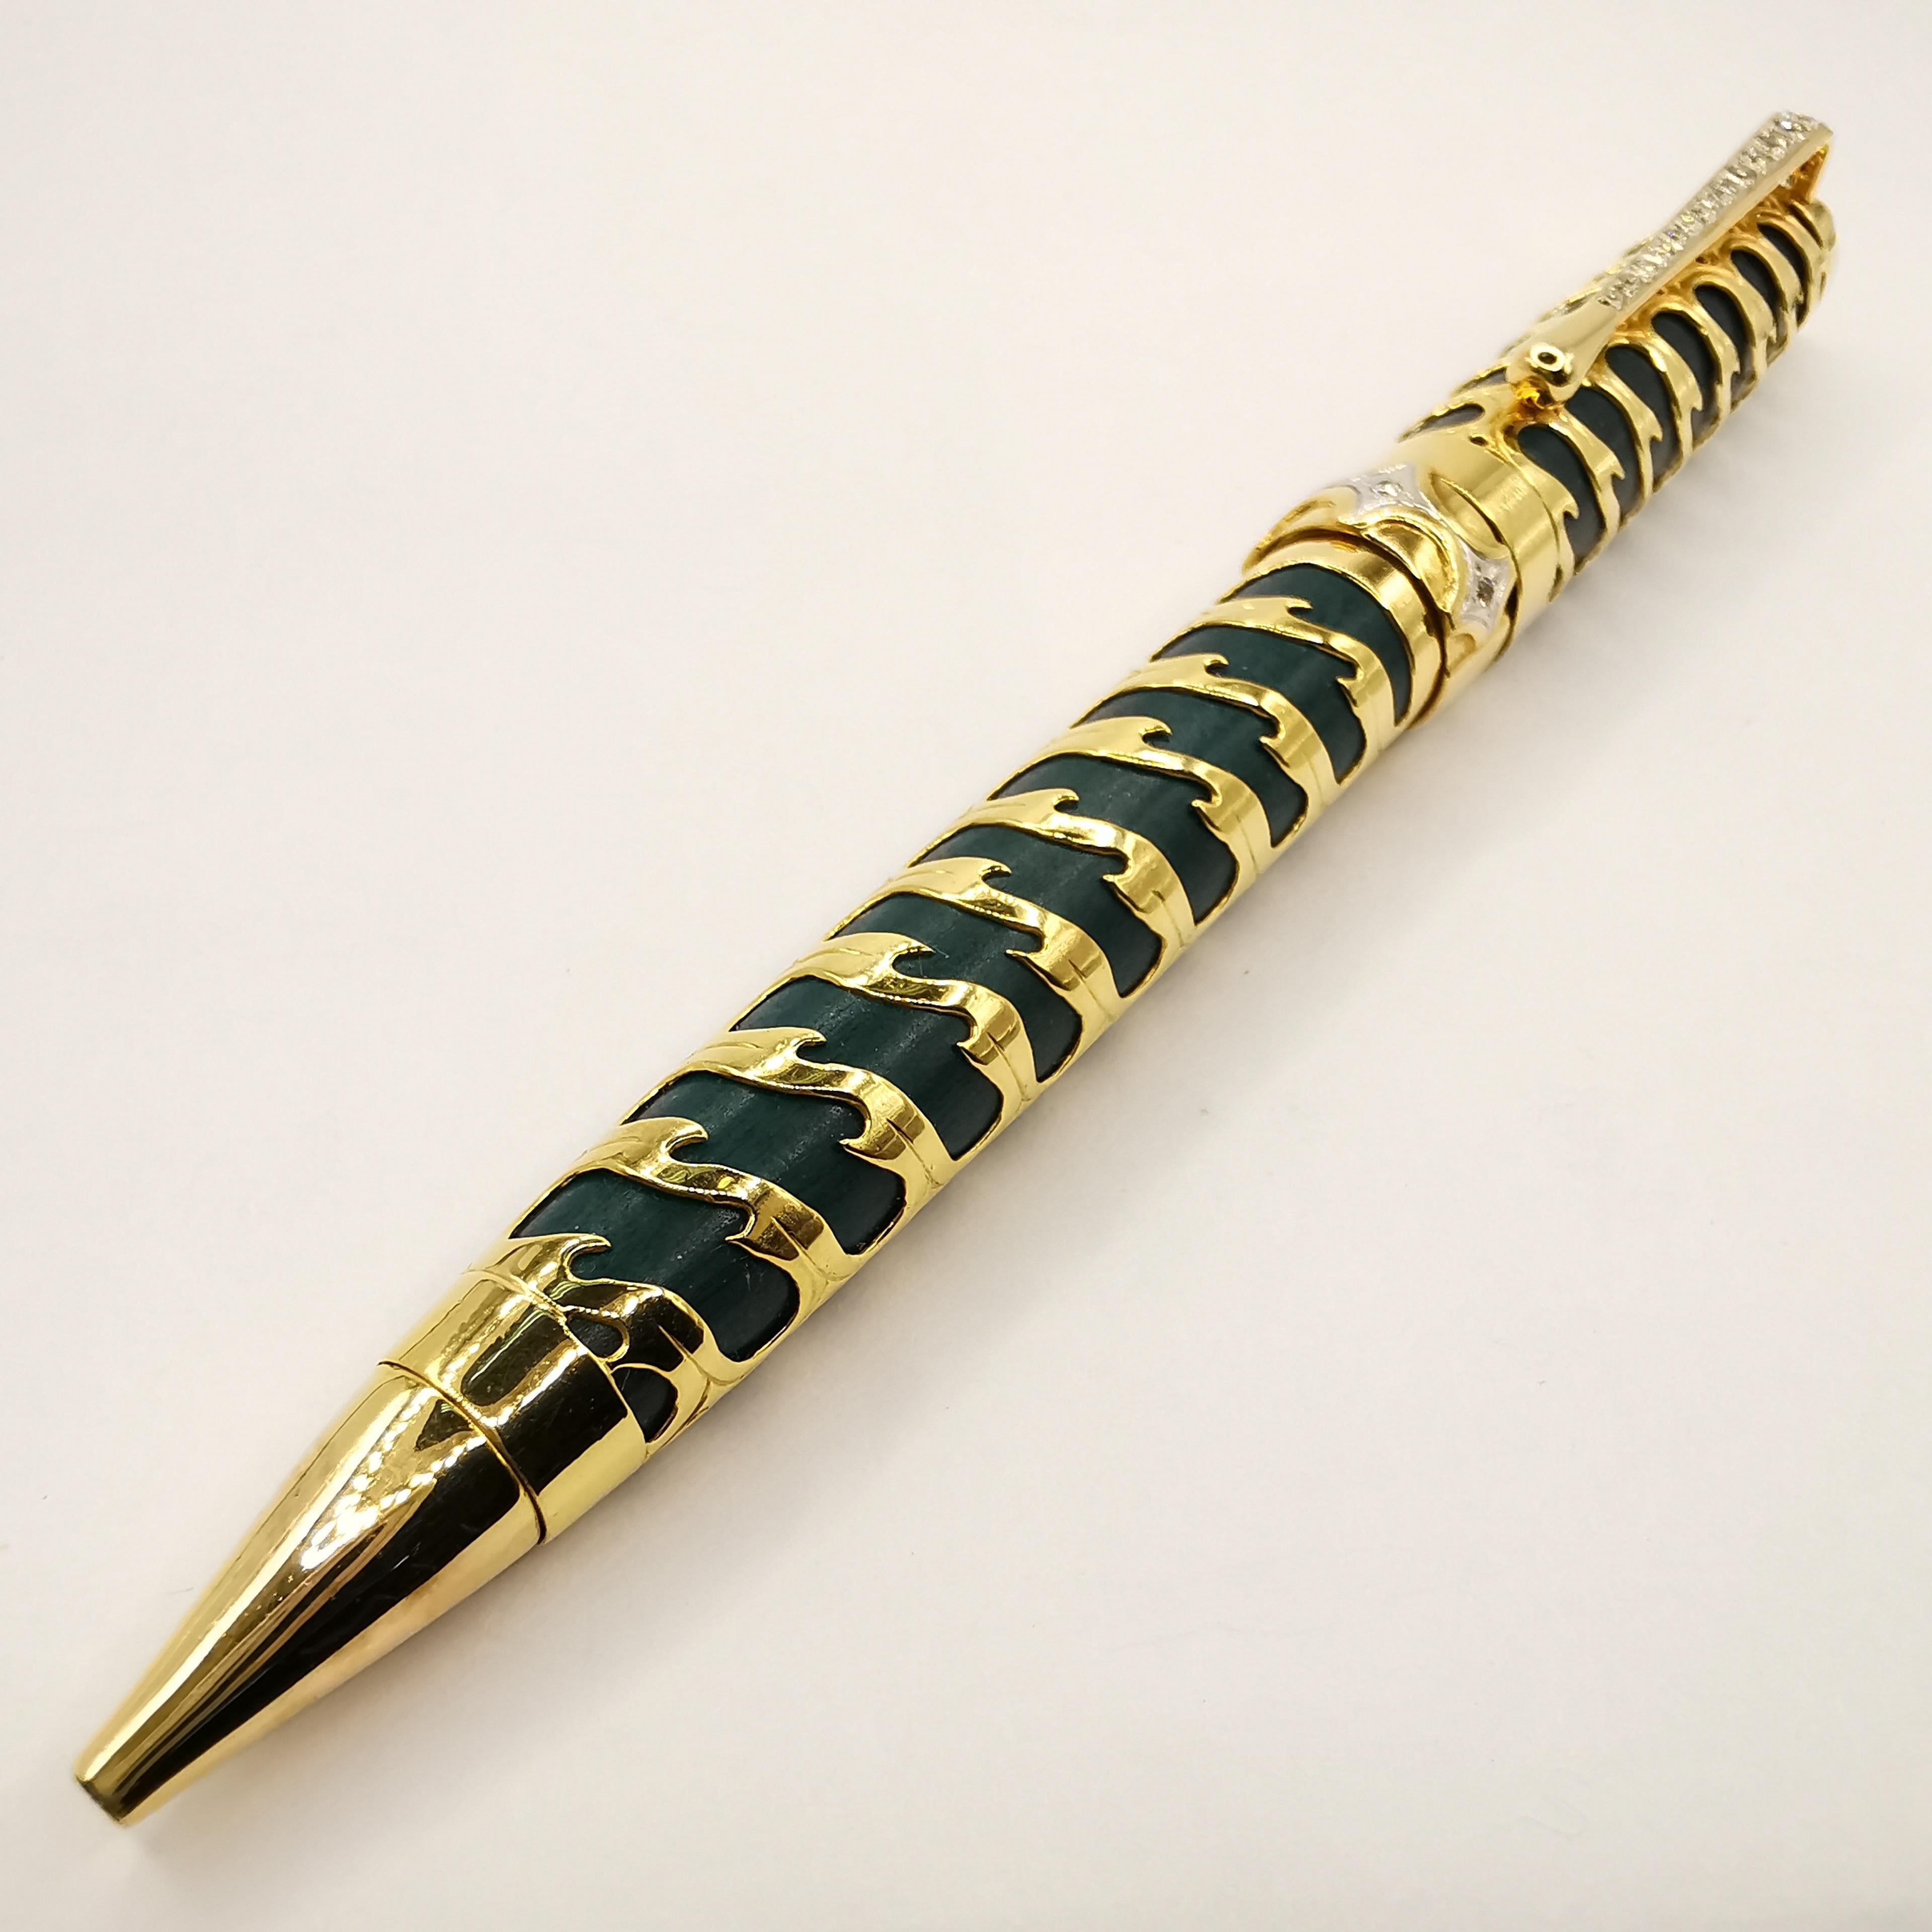 Indulge in luxury and add a touch of vintage elegance to your desk with this stunning Vintage Deep Green .4 Carat Diamond 18K Yellow Gold Ball Pen Sandalwood Box Set. The pen, crafted from high-quality materials, is an exquisite writing instrument